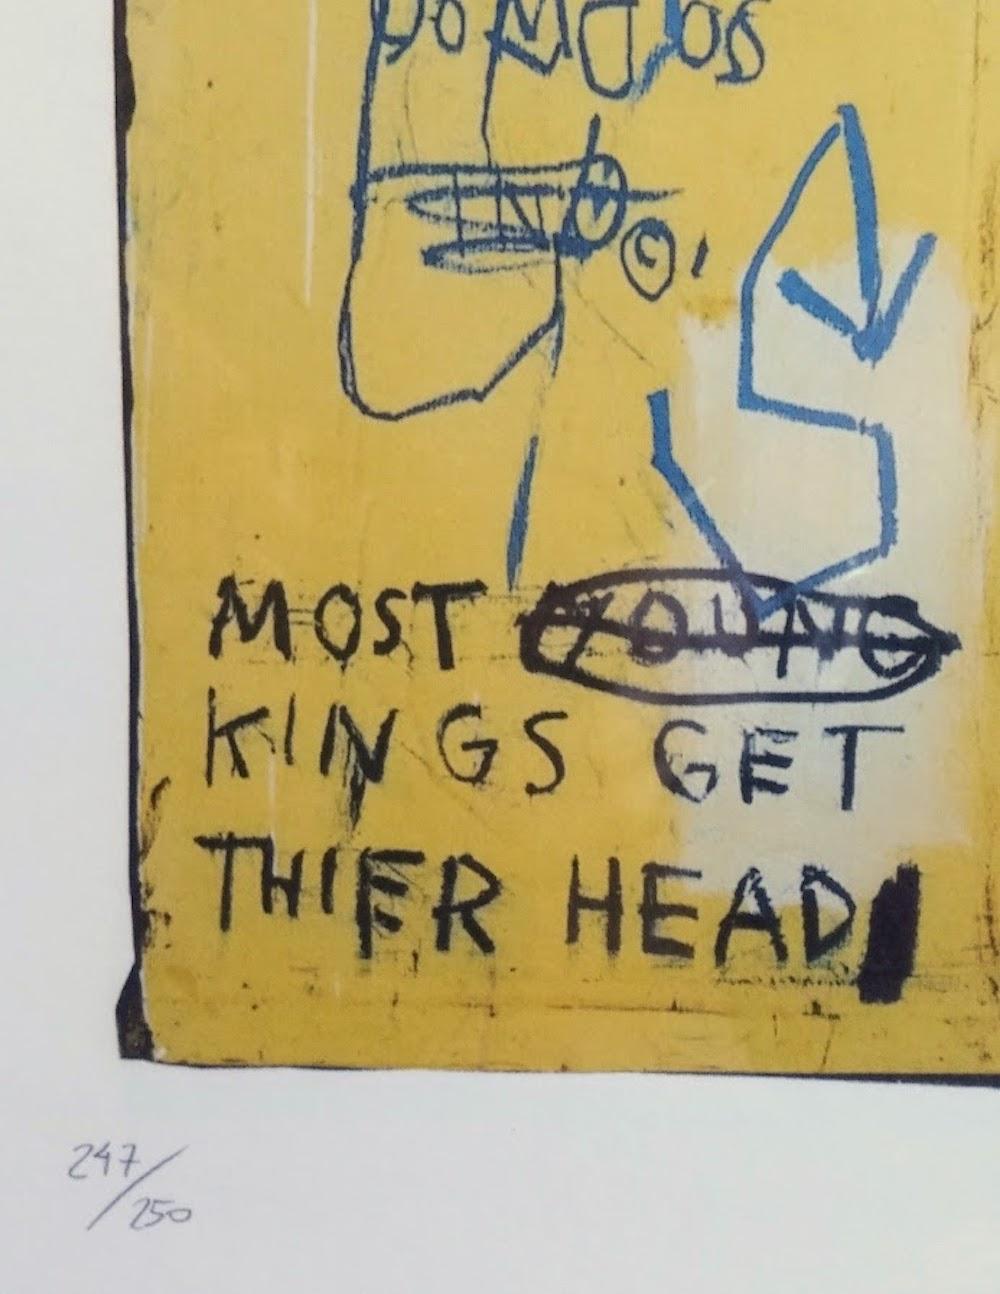 After Jean-Michel Basquiat - Lithography - Charles The First, 1982 - Street Art Print by (after) Jean-Michel Basquiat